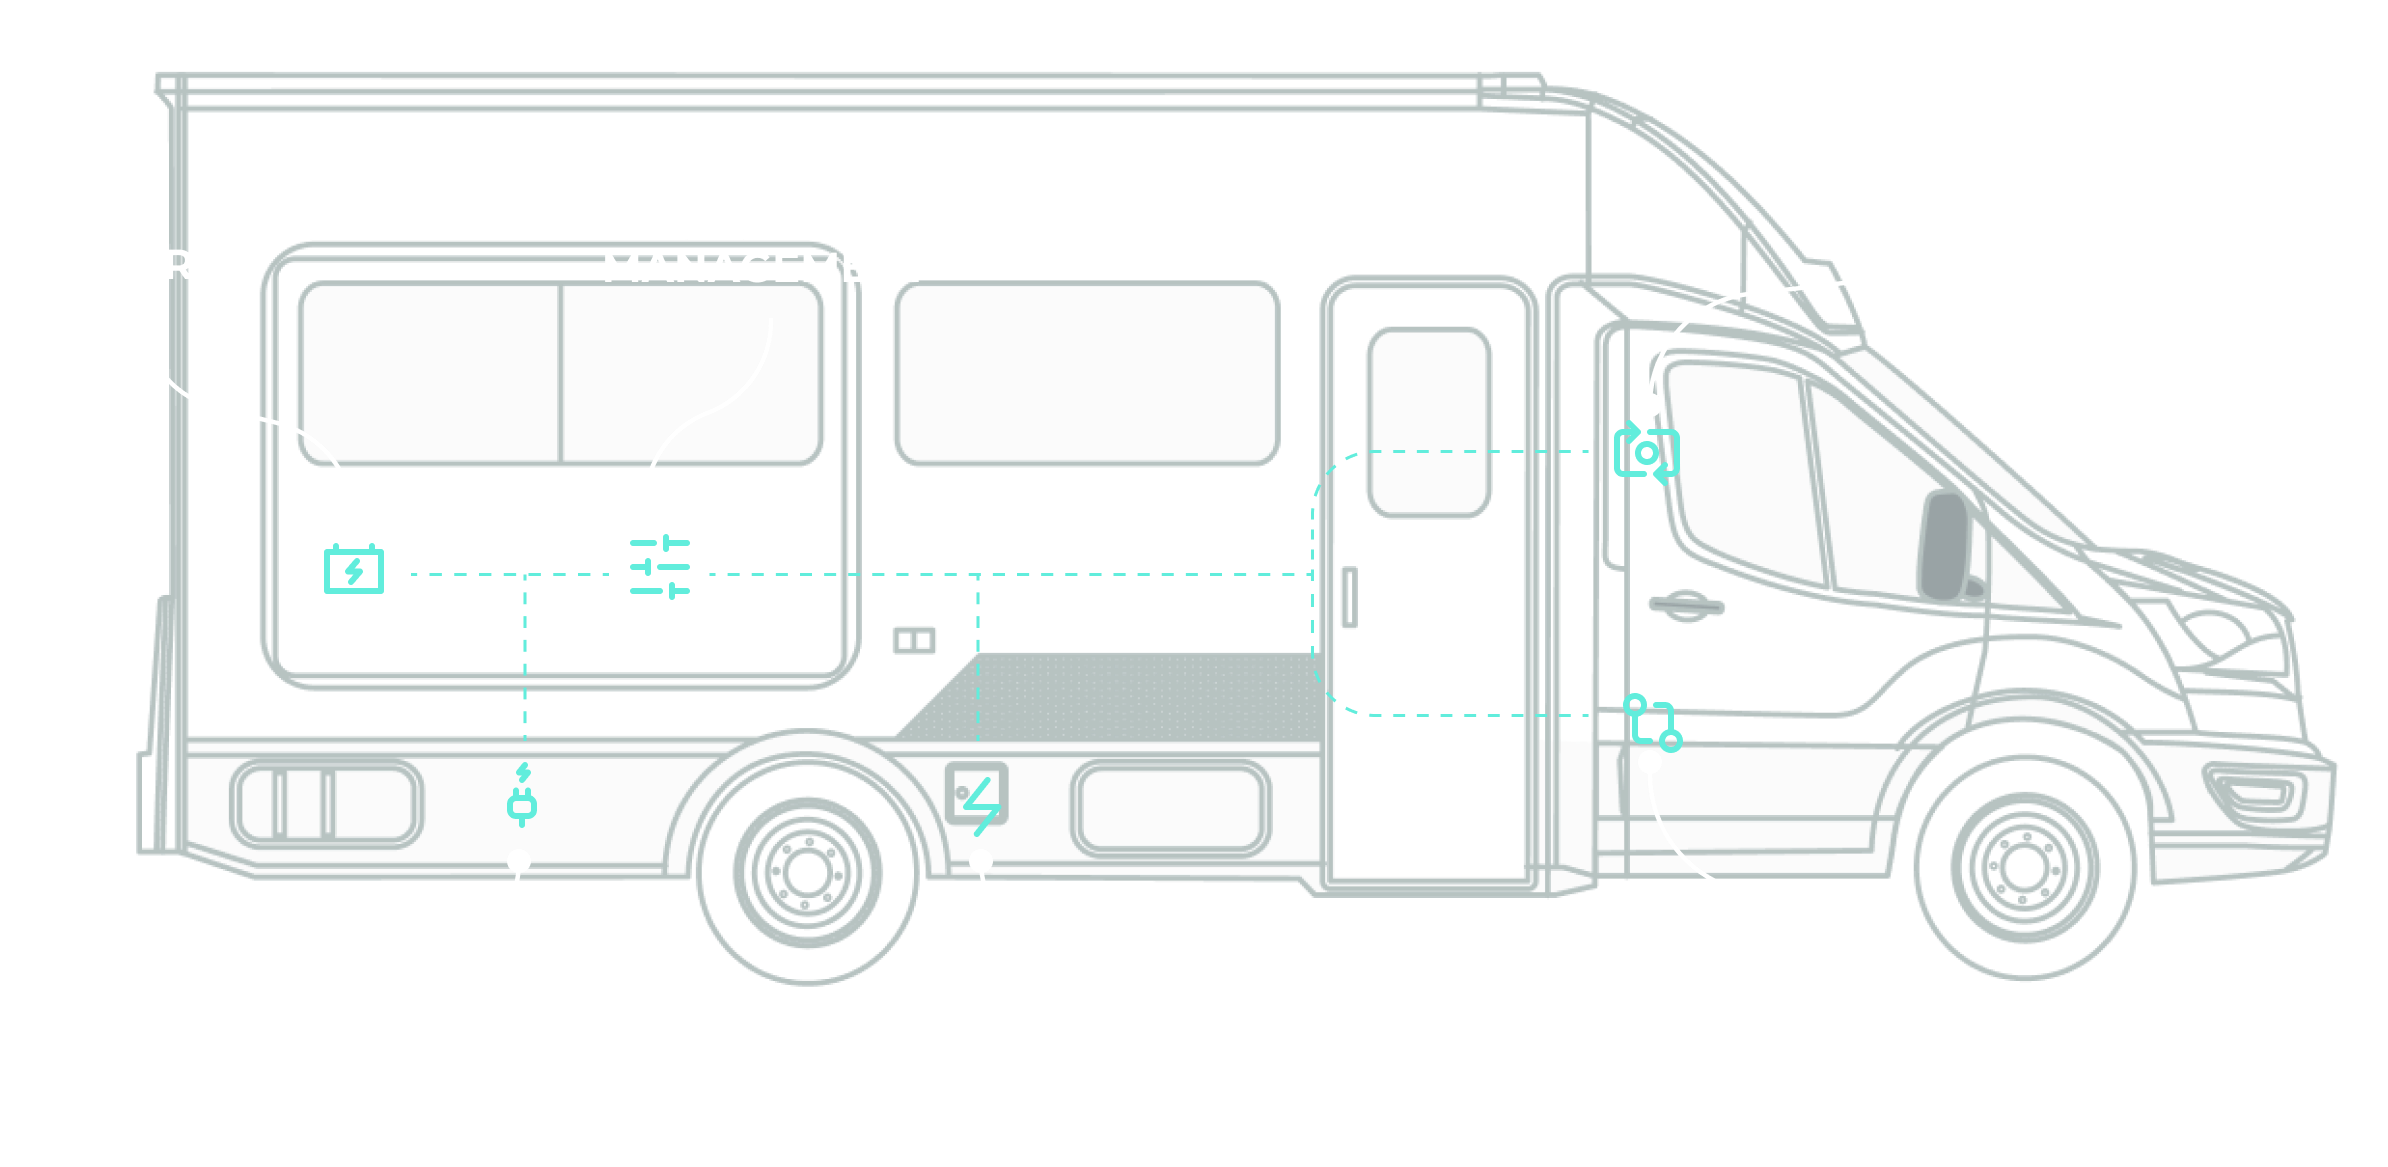 An outline of an RV camper van, with arrows pointing to and highlighting the Batteries, Battery Management, Circuit Protection, Chargers, Portable Power and Power Distribution features. 